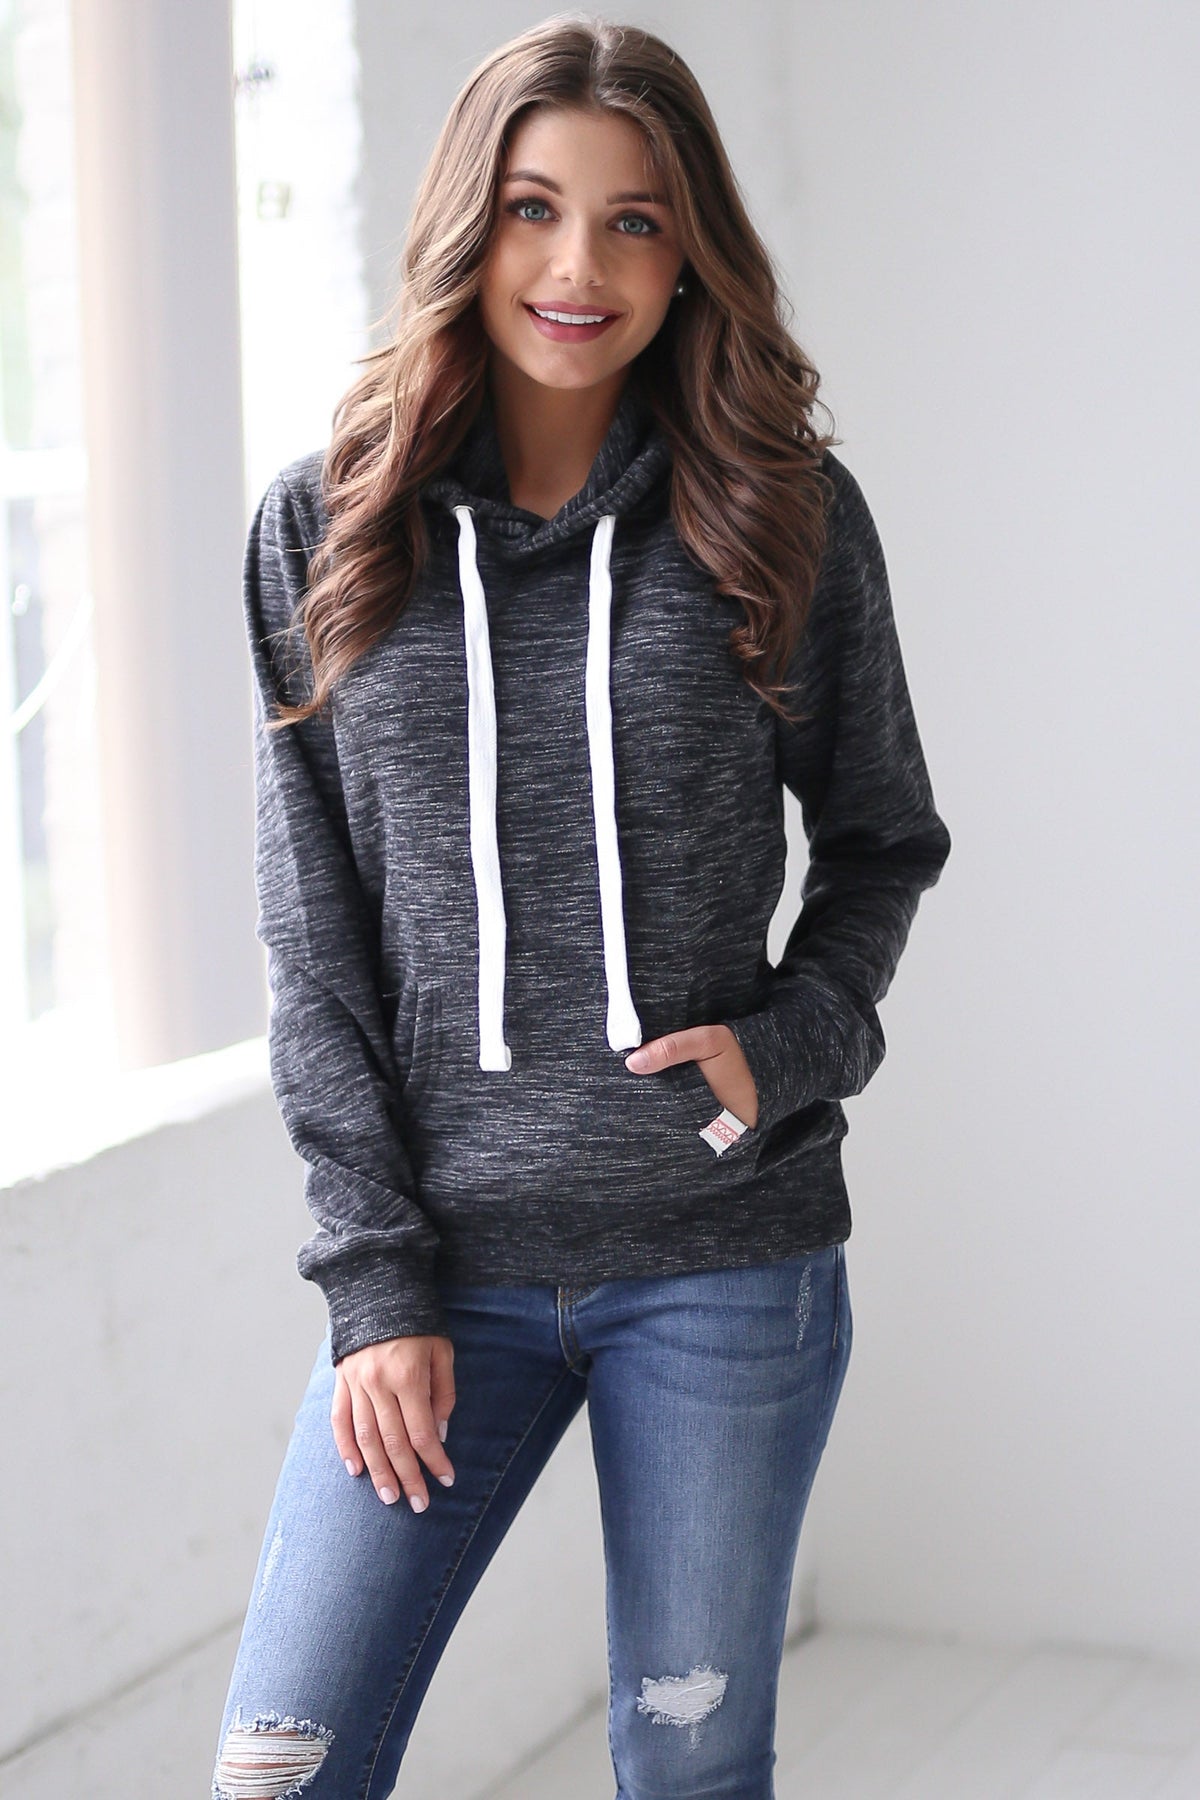 Make Yourself At Home Hoodie - Marled Black - Closet Candy Boutique